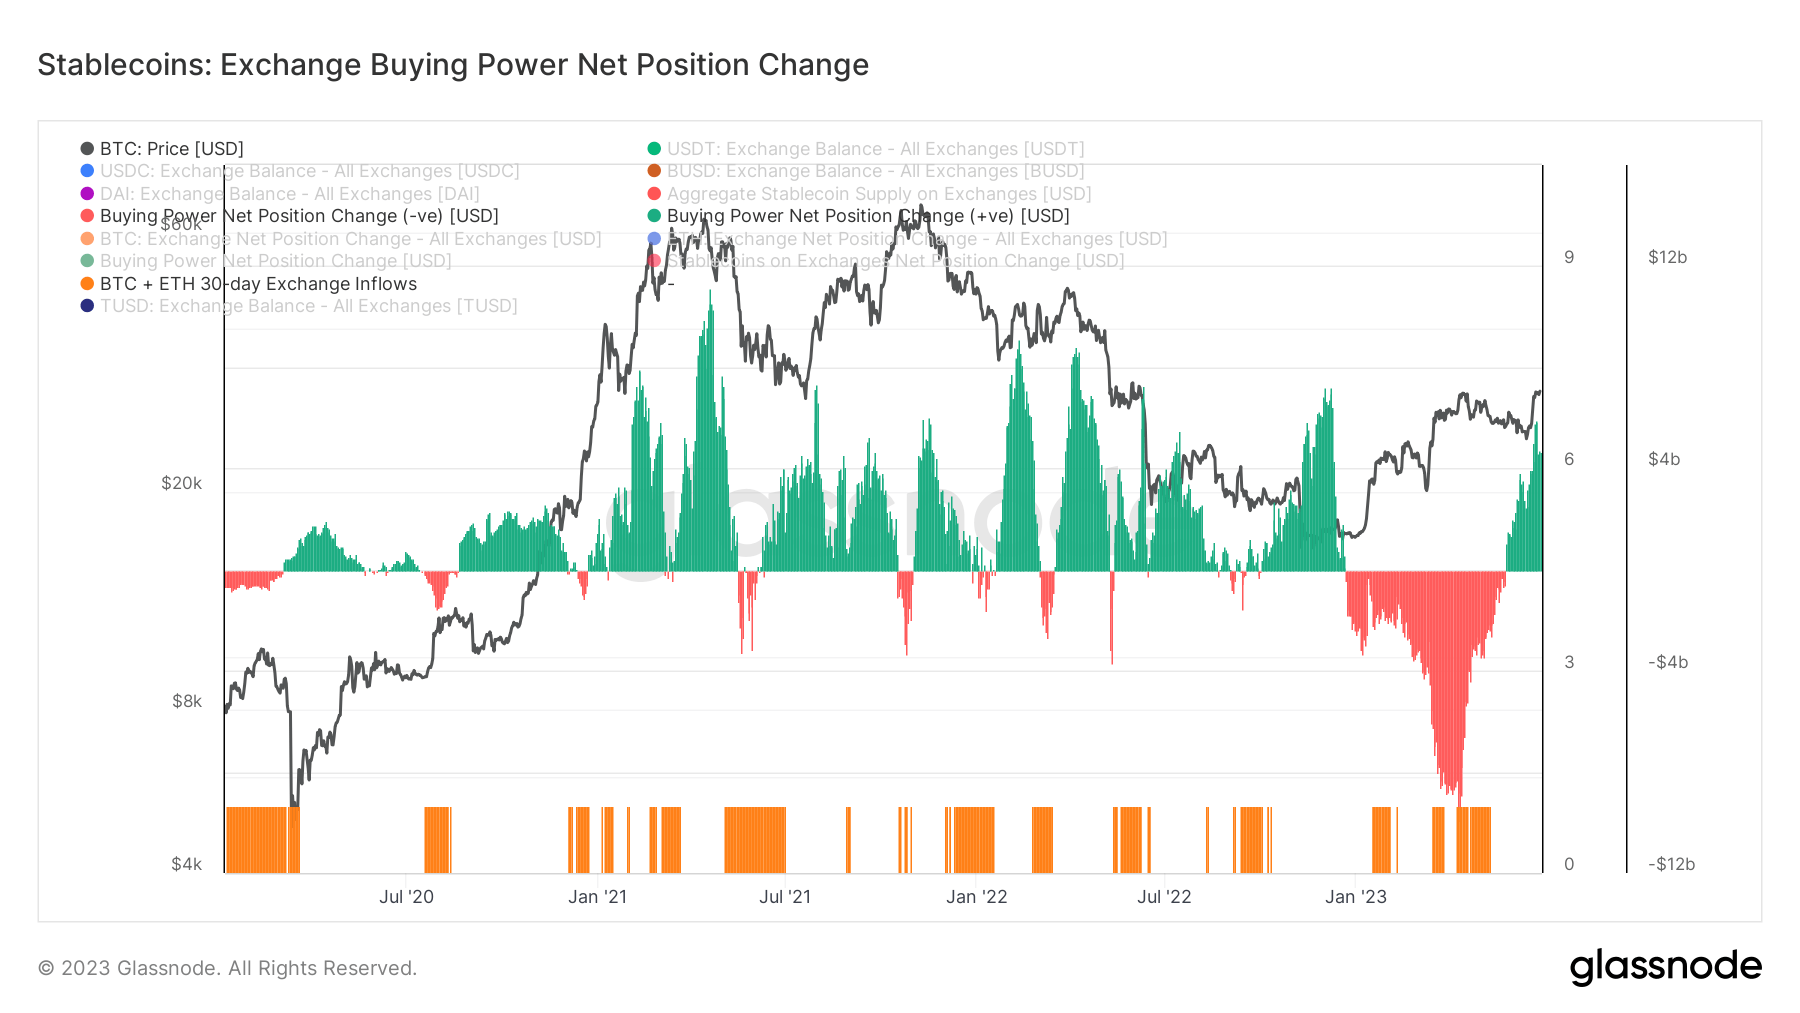 Stablecoin buying power on exchanges increases as BTC and ETH see outflows